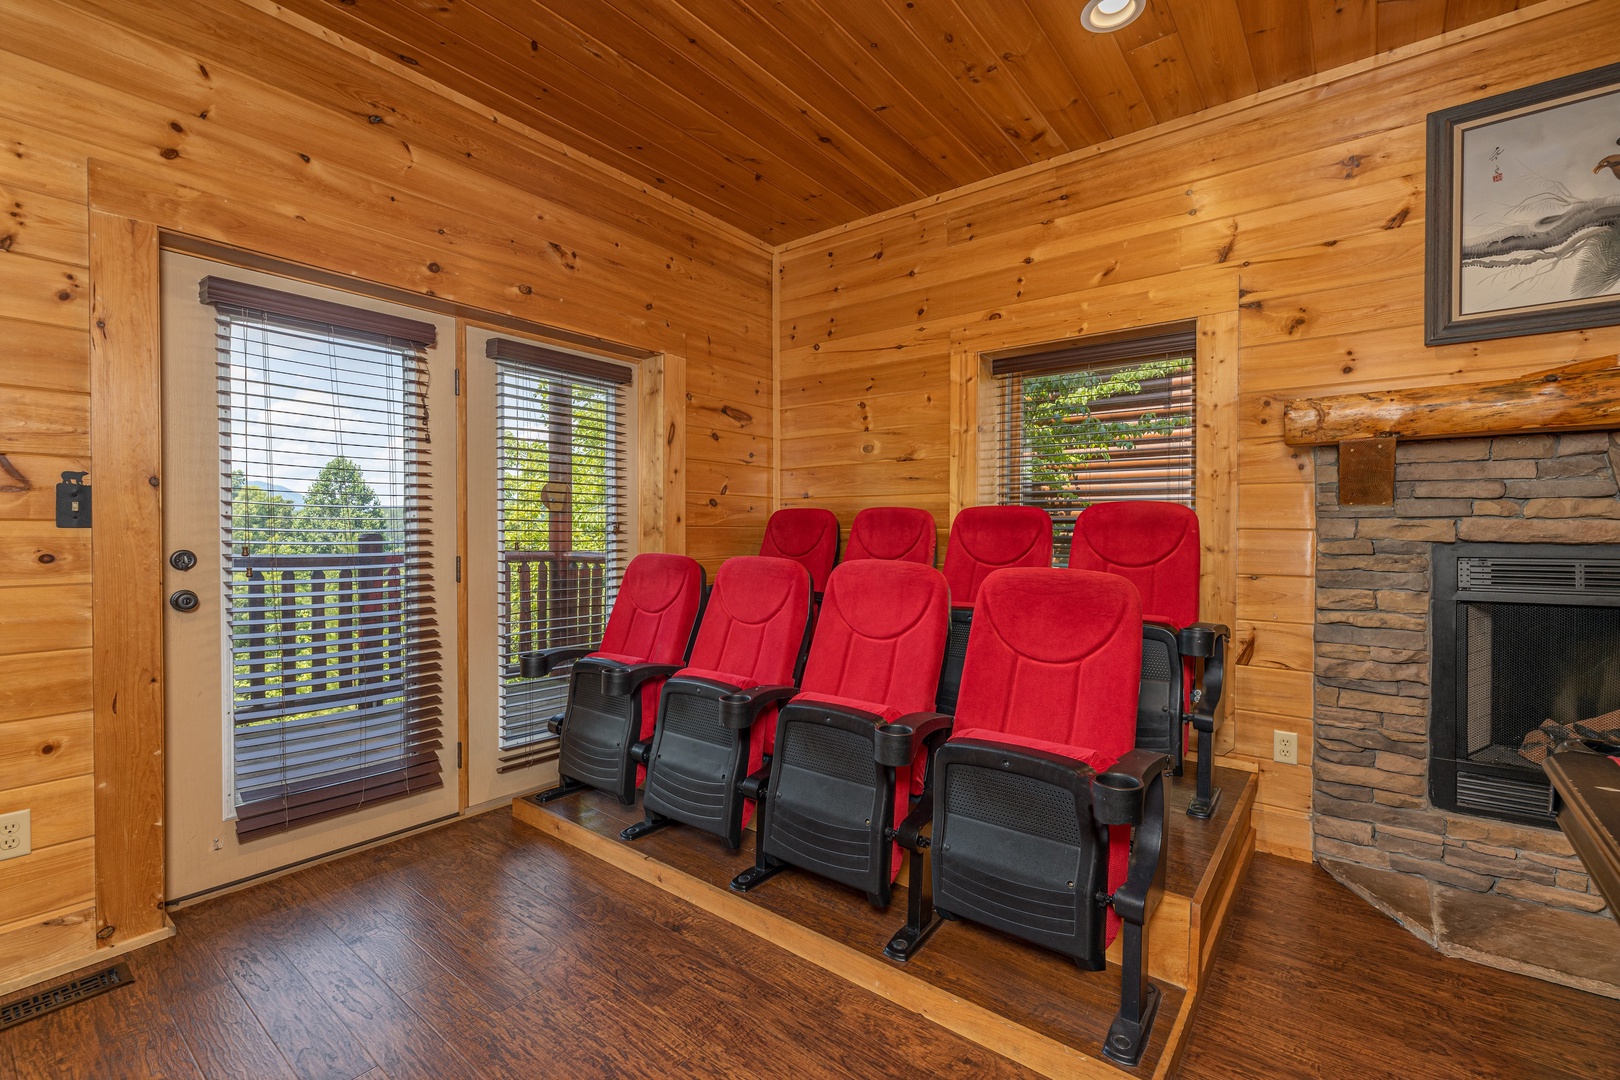 Theater seating at Loving Every Minute, a 5 bedroom cabin rental located in Pigeon Forge